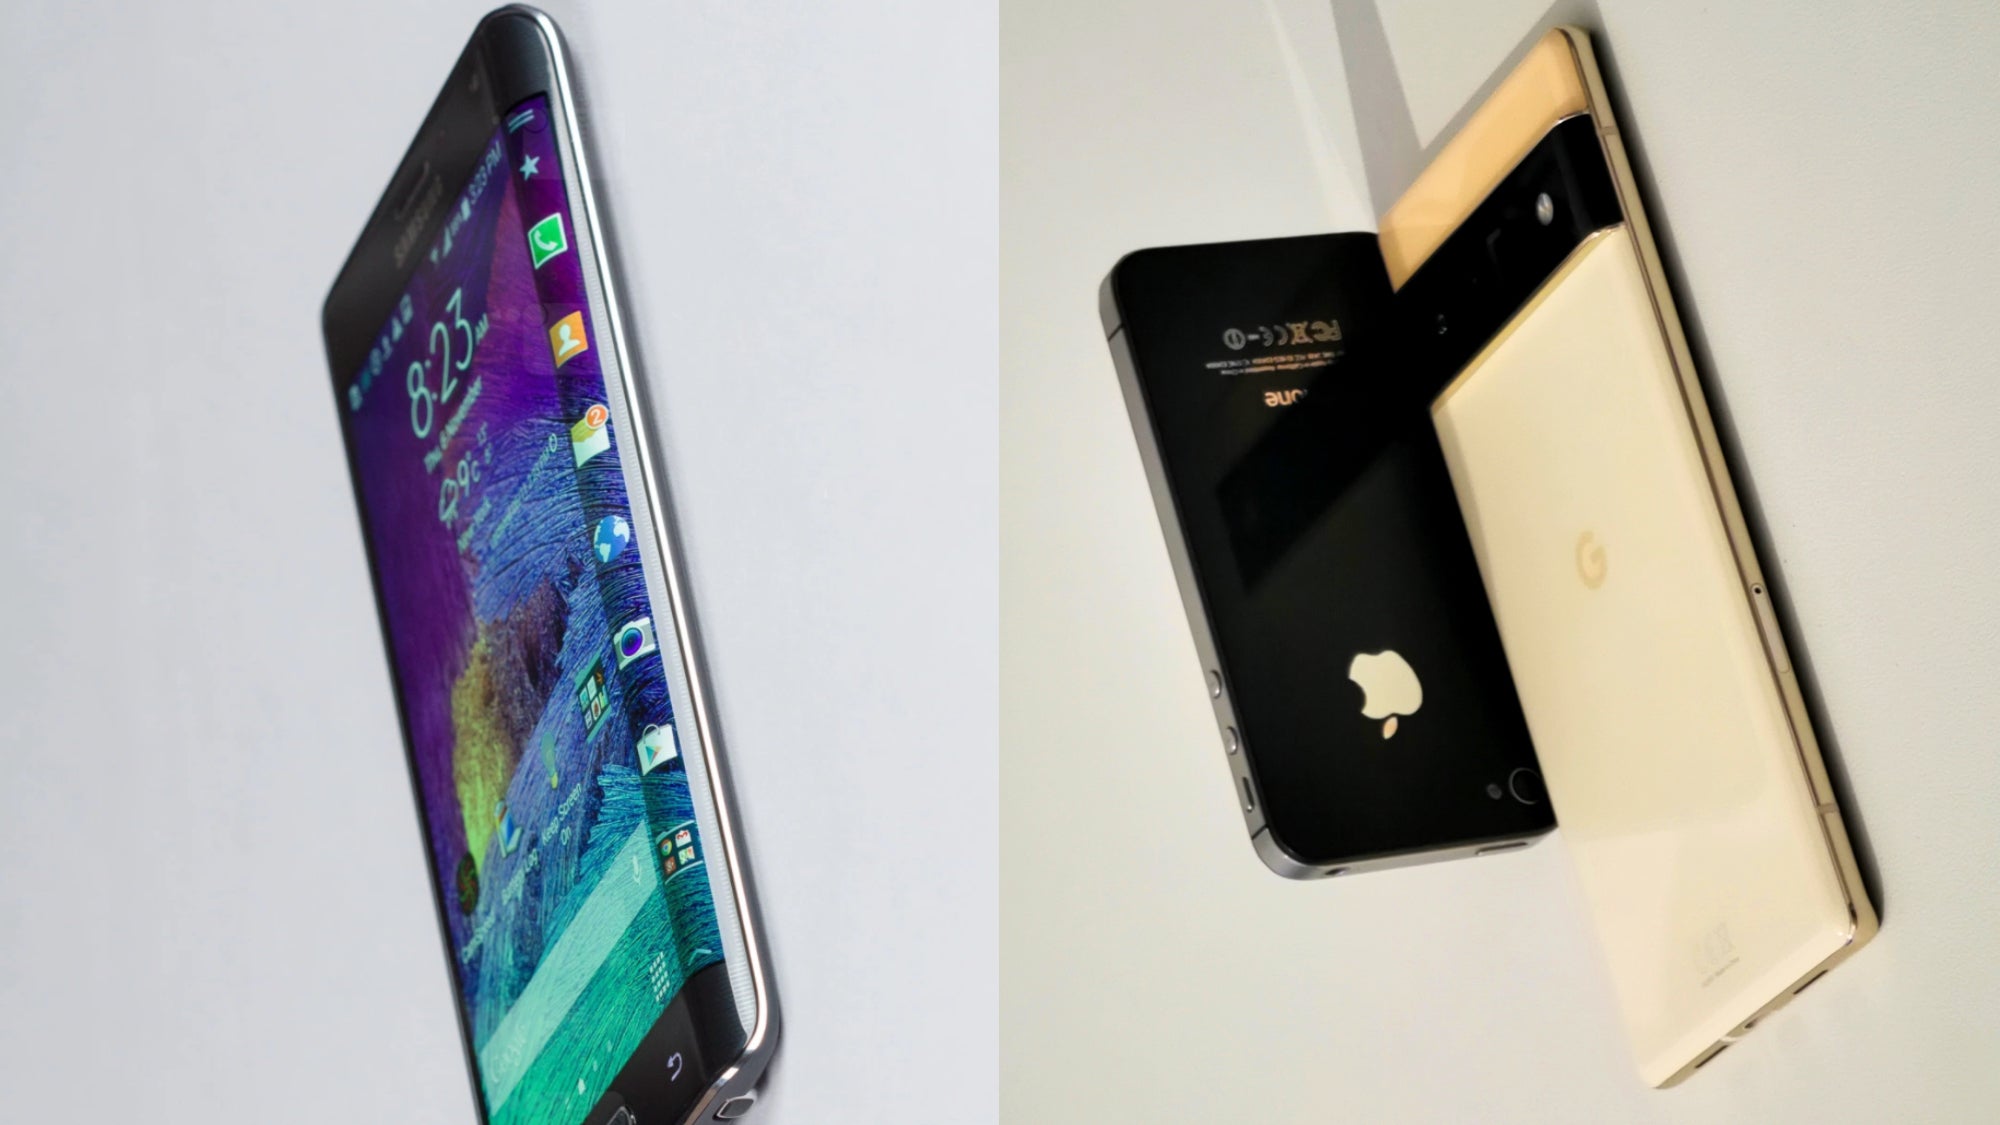 The Galaxy Note Edge was the first phone with a curved display - only on the right side. The iPhone 4 made flat phones look cool. The iPhone 14 Pro is said to bring back the iPhone 4&#039;s design in September 2022. - Eat an Apple, Android users: Your 2022 phone might look and feel like an iPhone